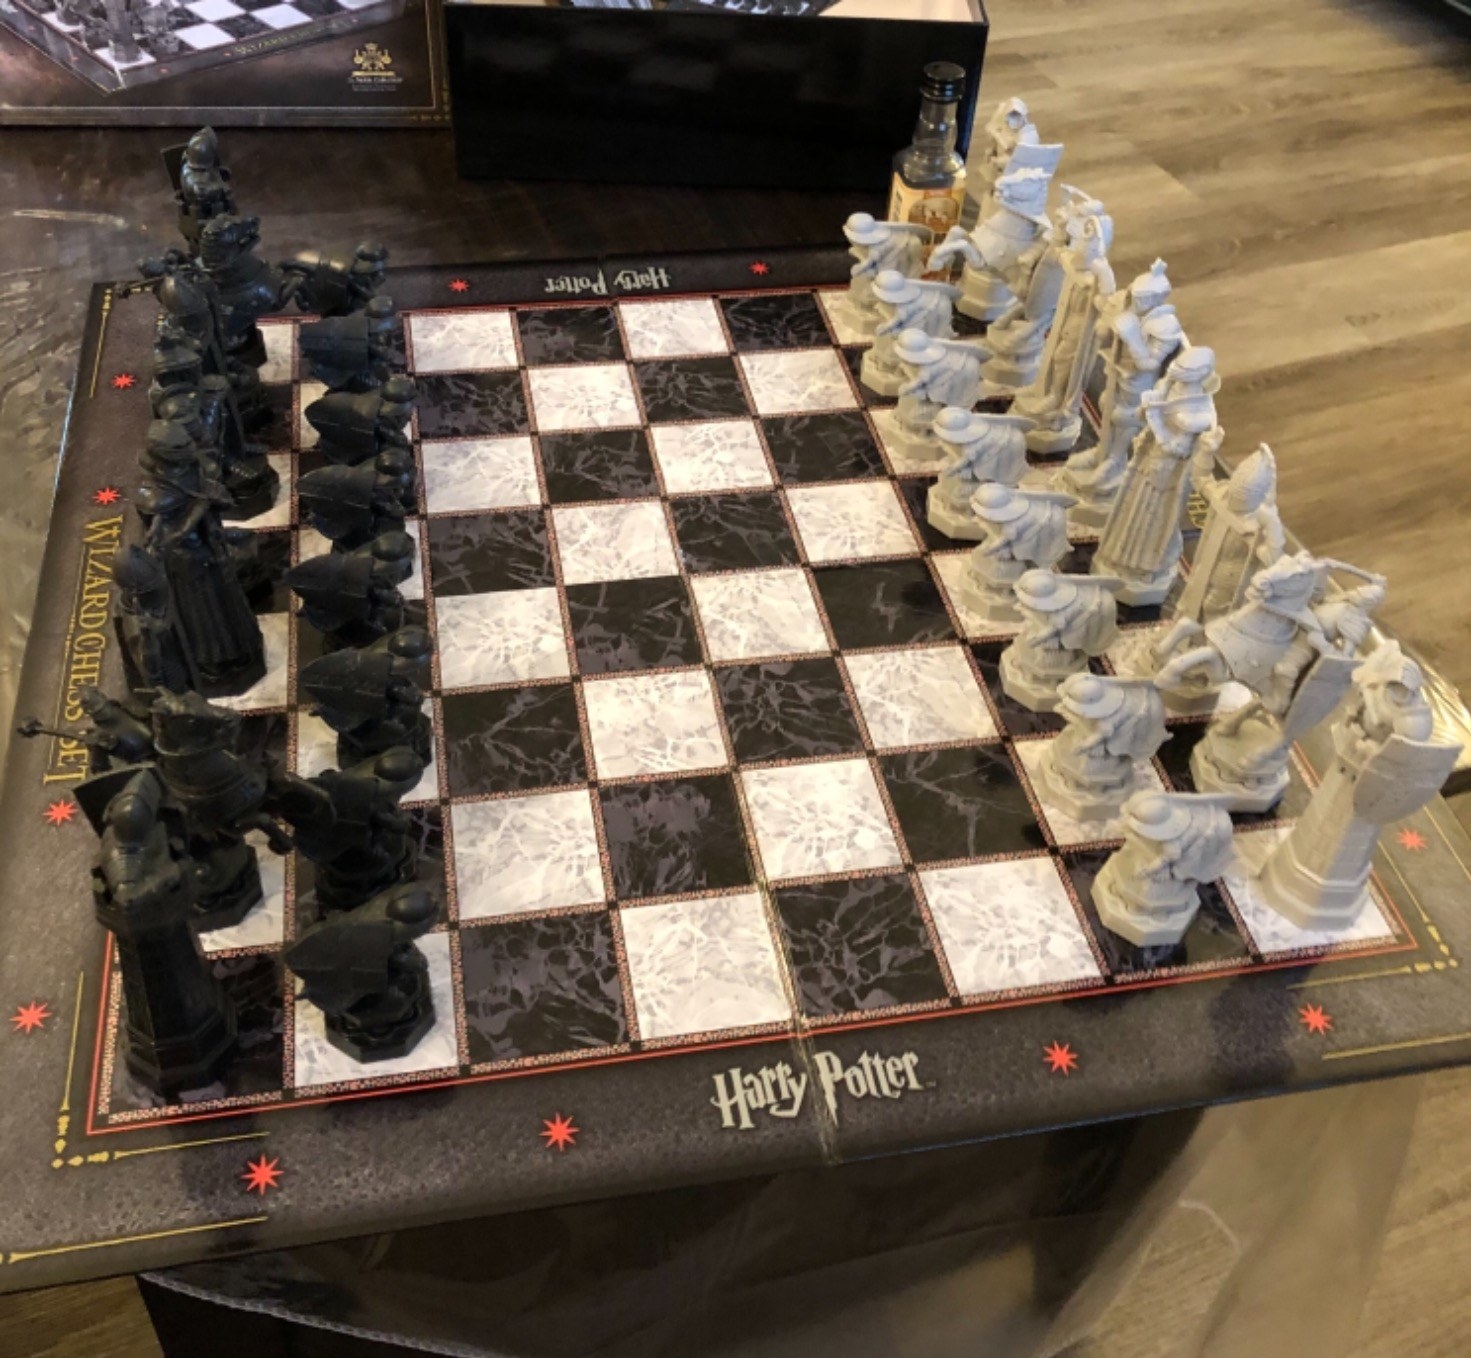 Reviewer image of black and white cardboard chessboard that says &quot;Harry Potter wizard chess set&quot; with pieces set up